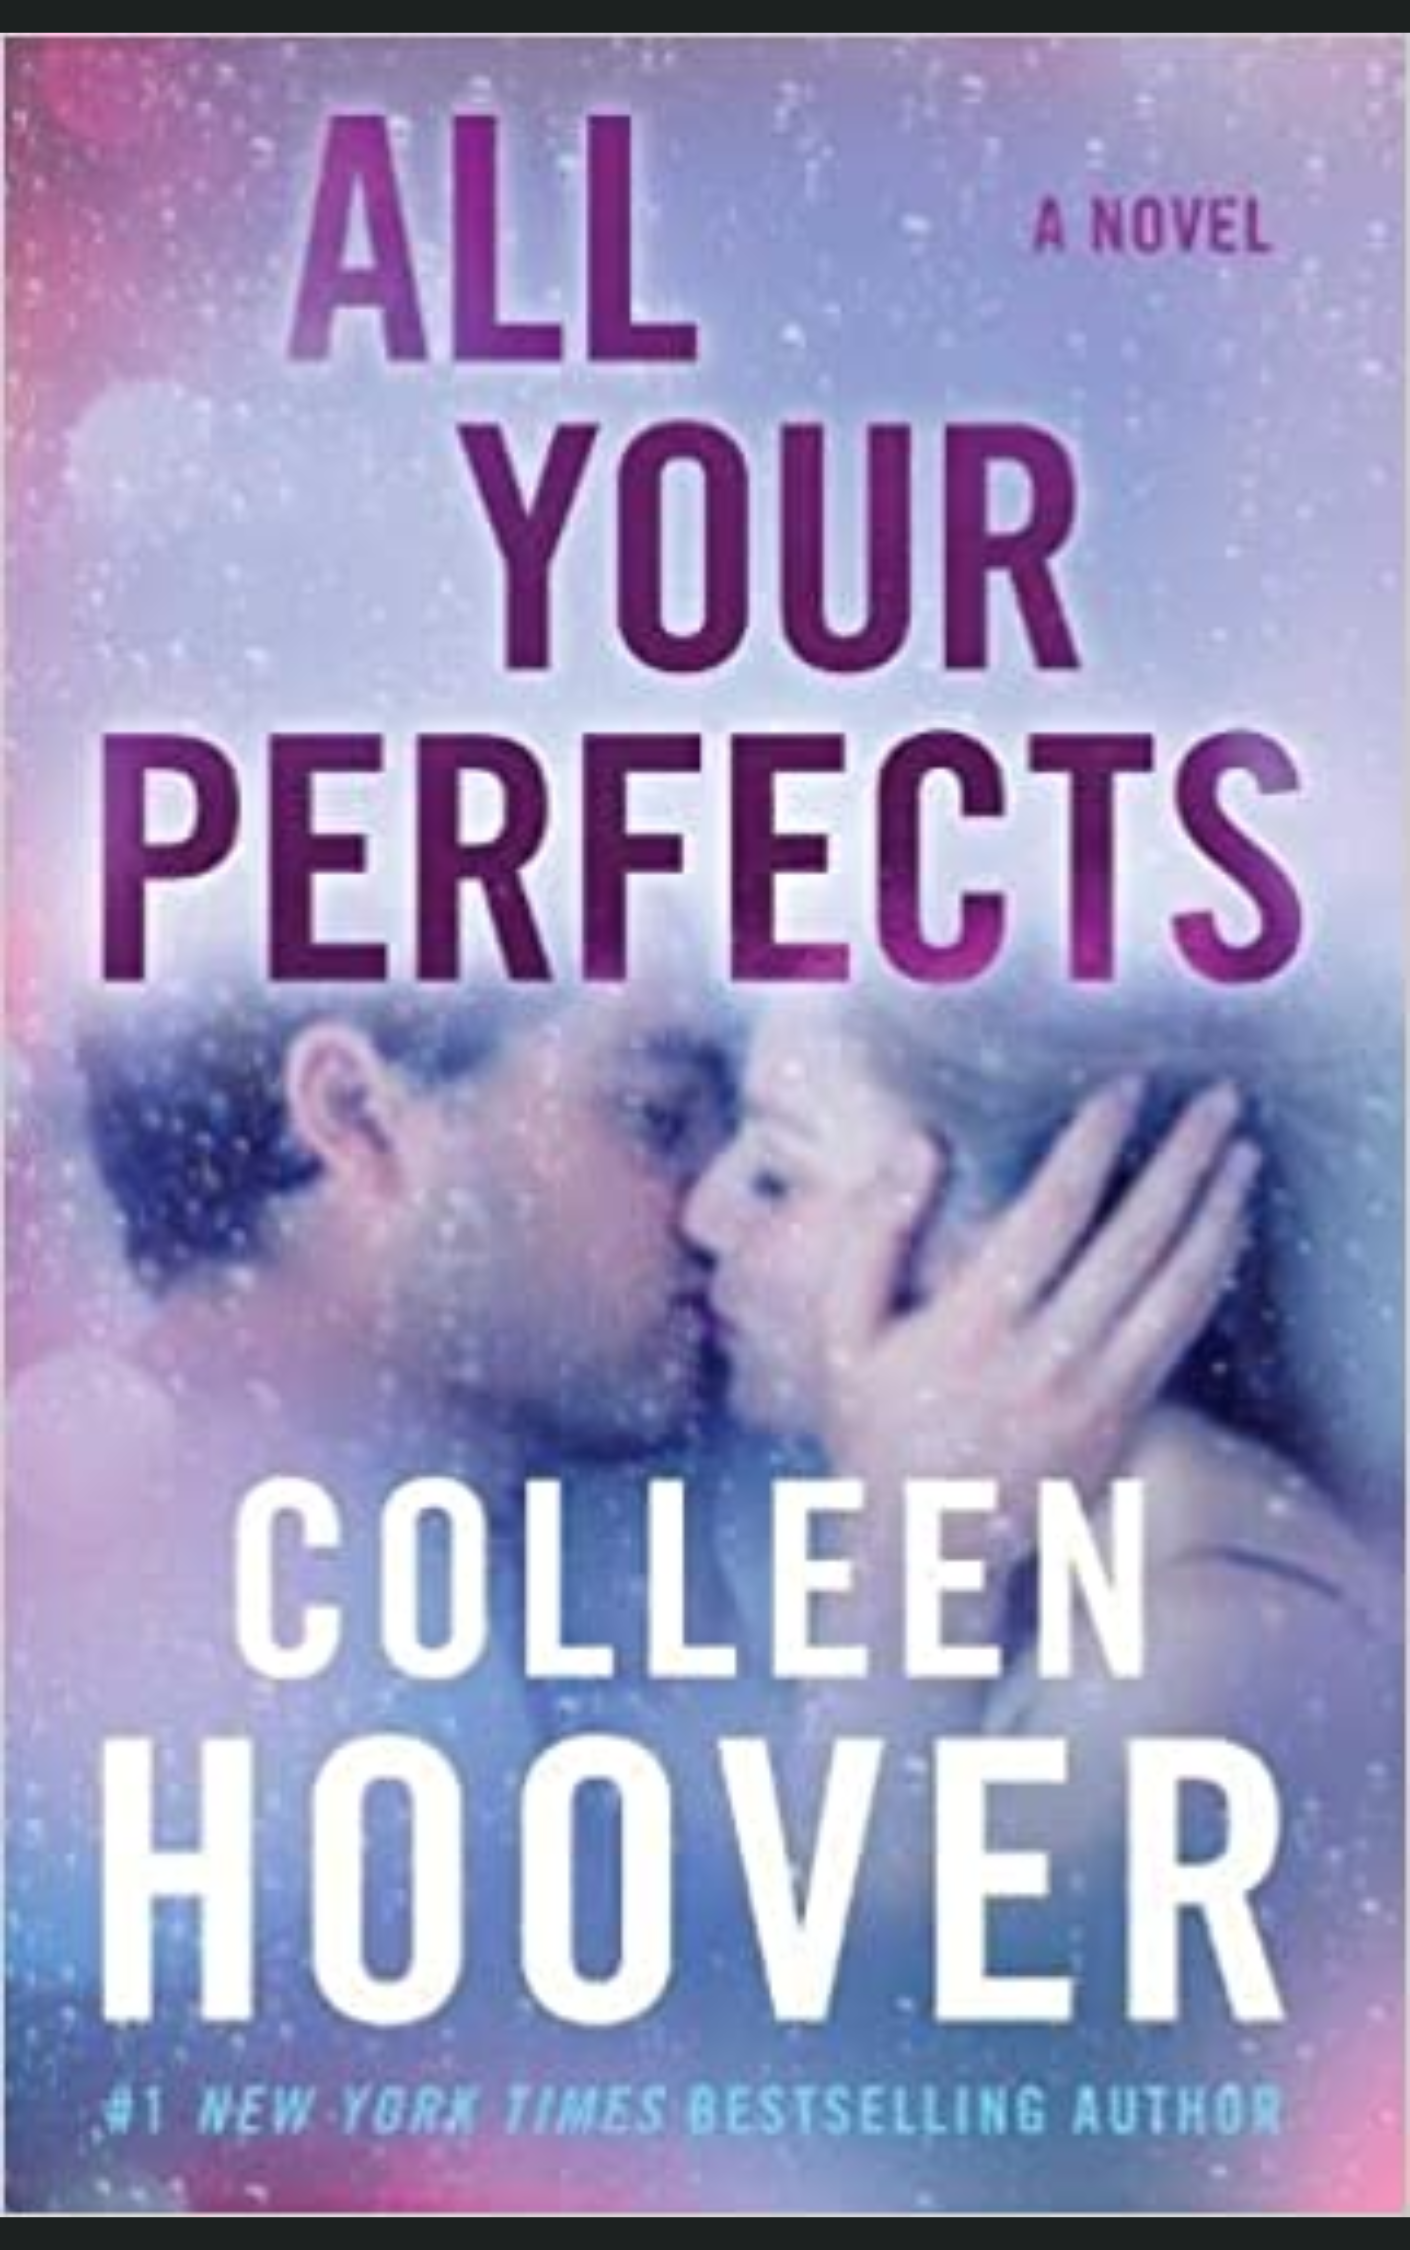 ALL YOUR PERFECTS by COLLEEN HOOVER